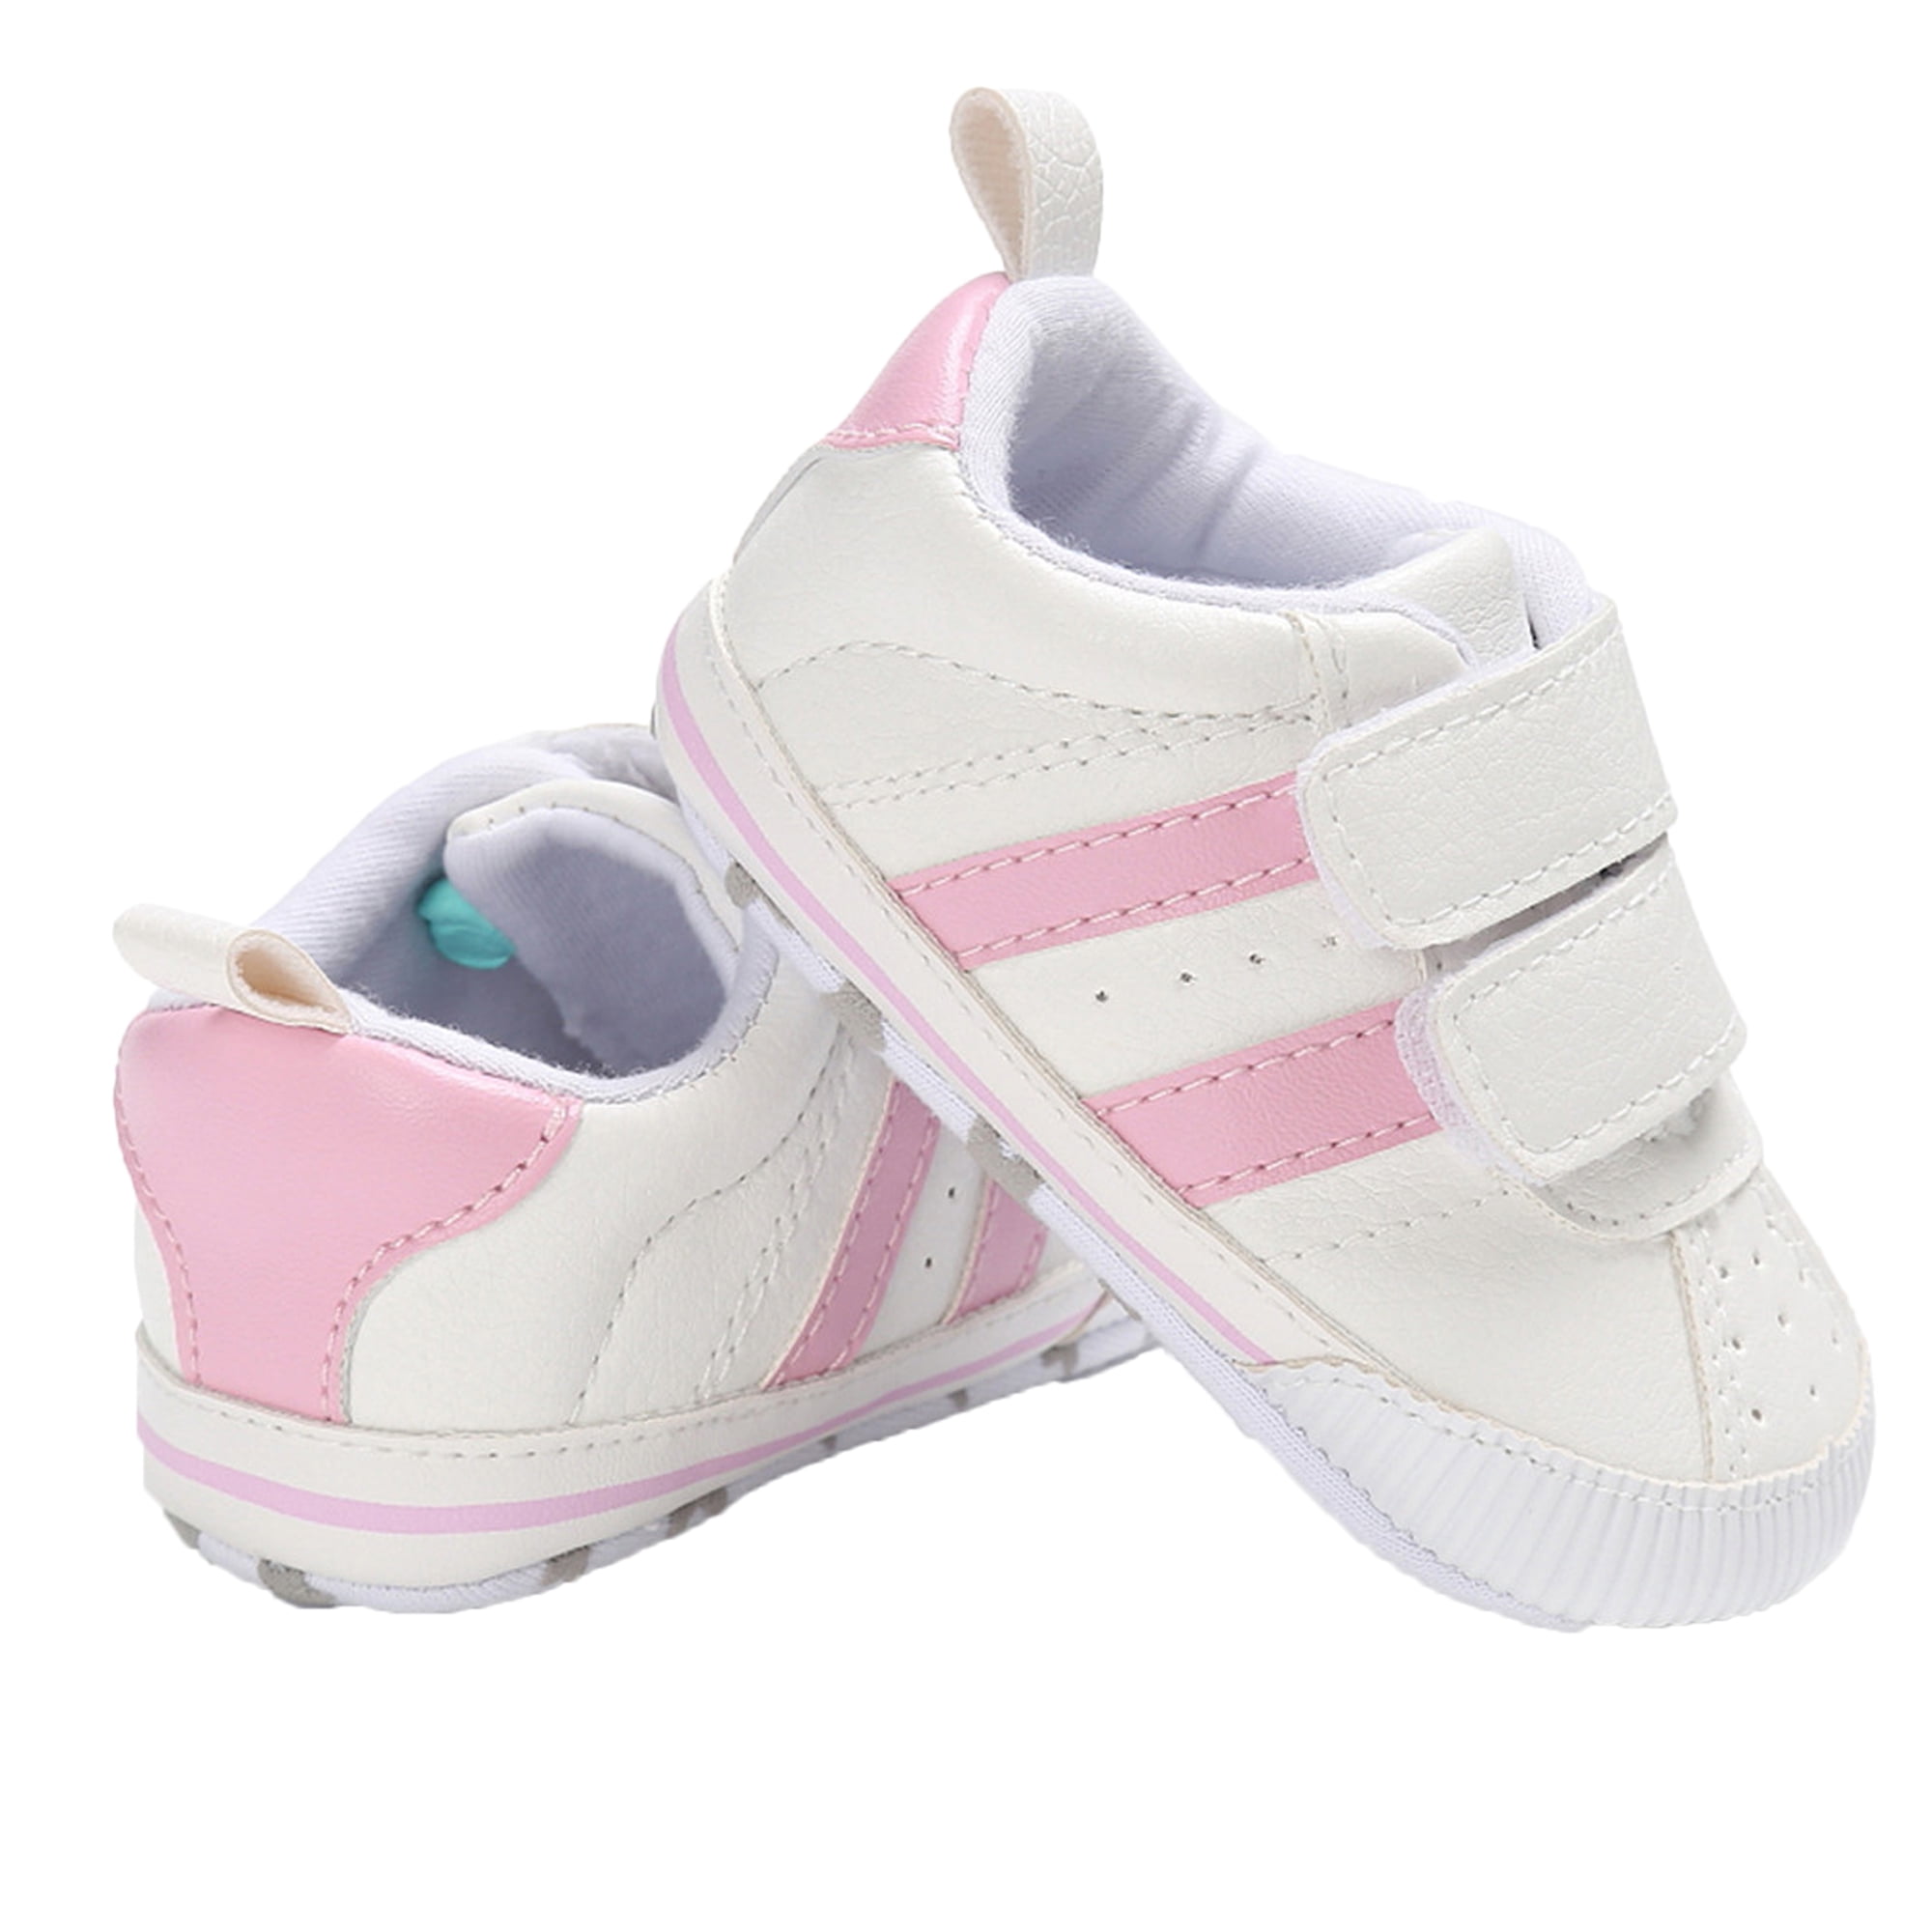 Toddler Baby Boy Girl Crib Shoes Anti-slip Prewalker Soft Sole Trainers Sneakers 